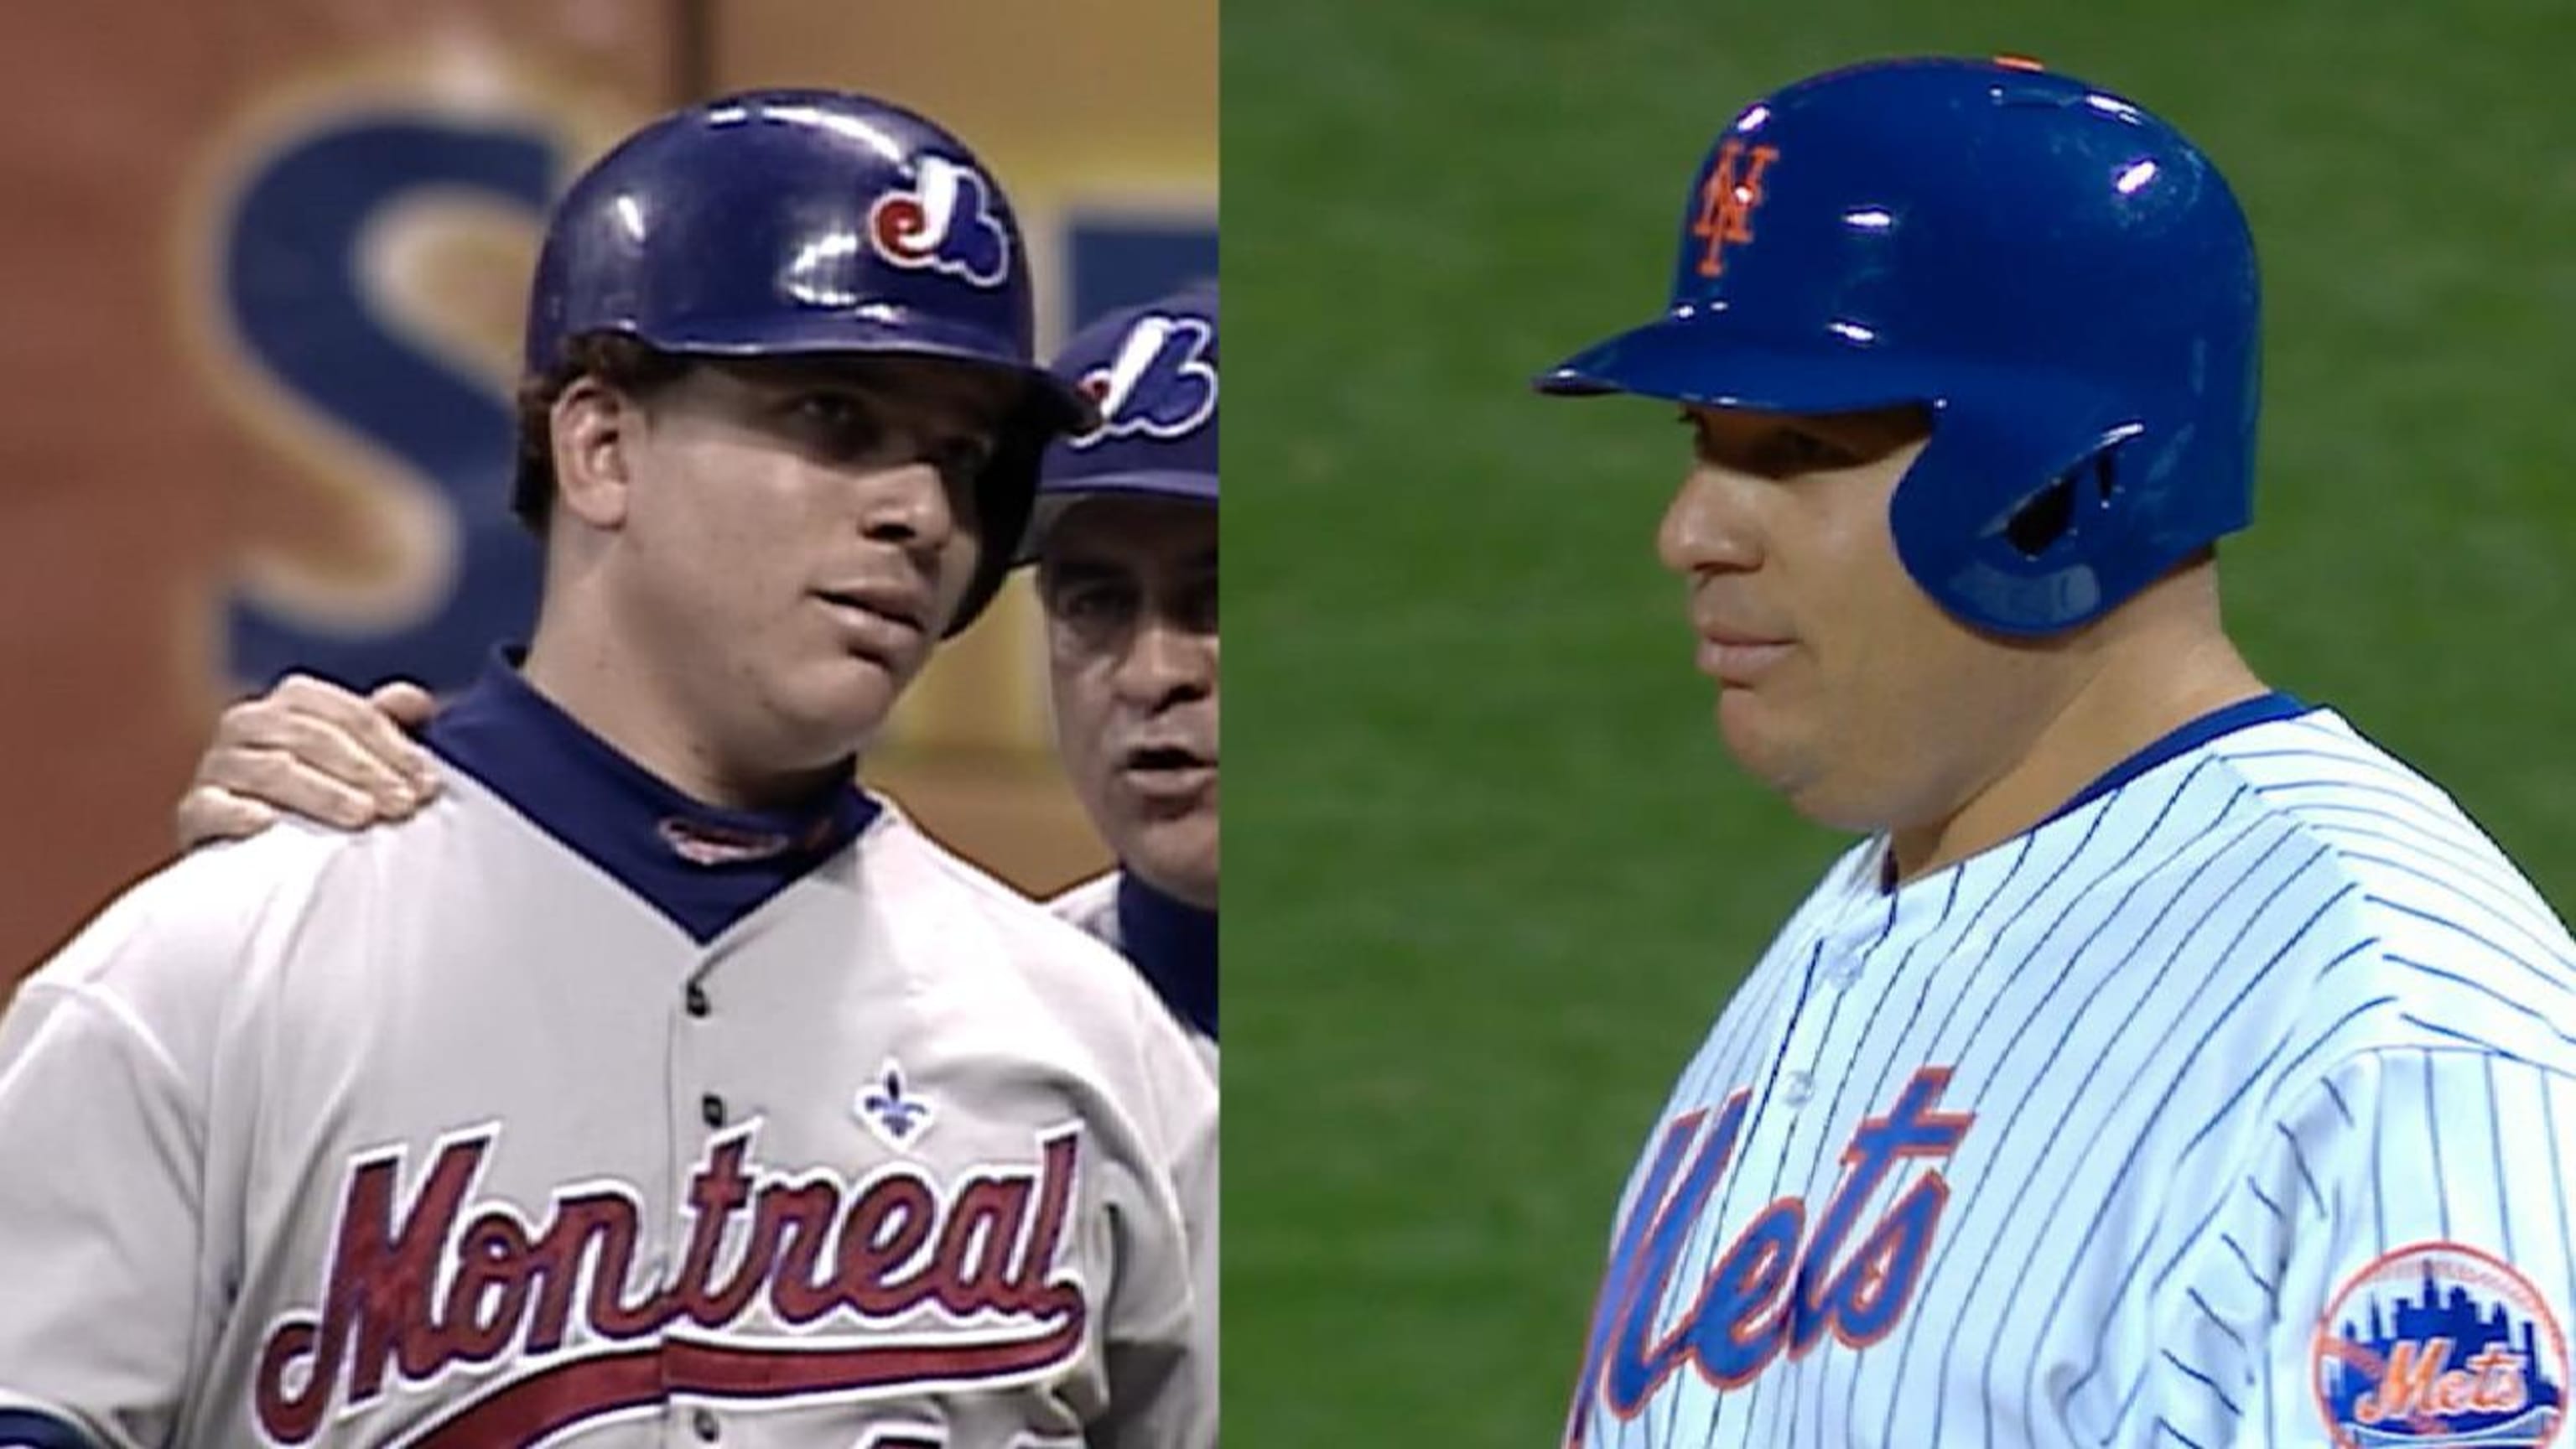 Bartolo Colon Starts for the First Time in 636 Days, Wins - TV